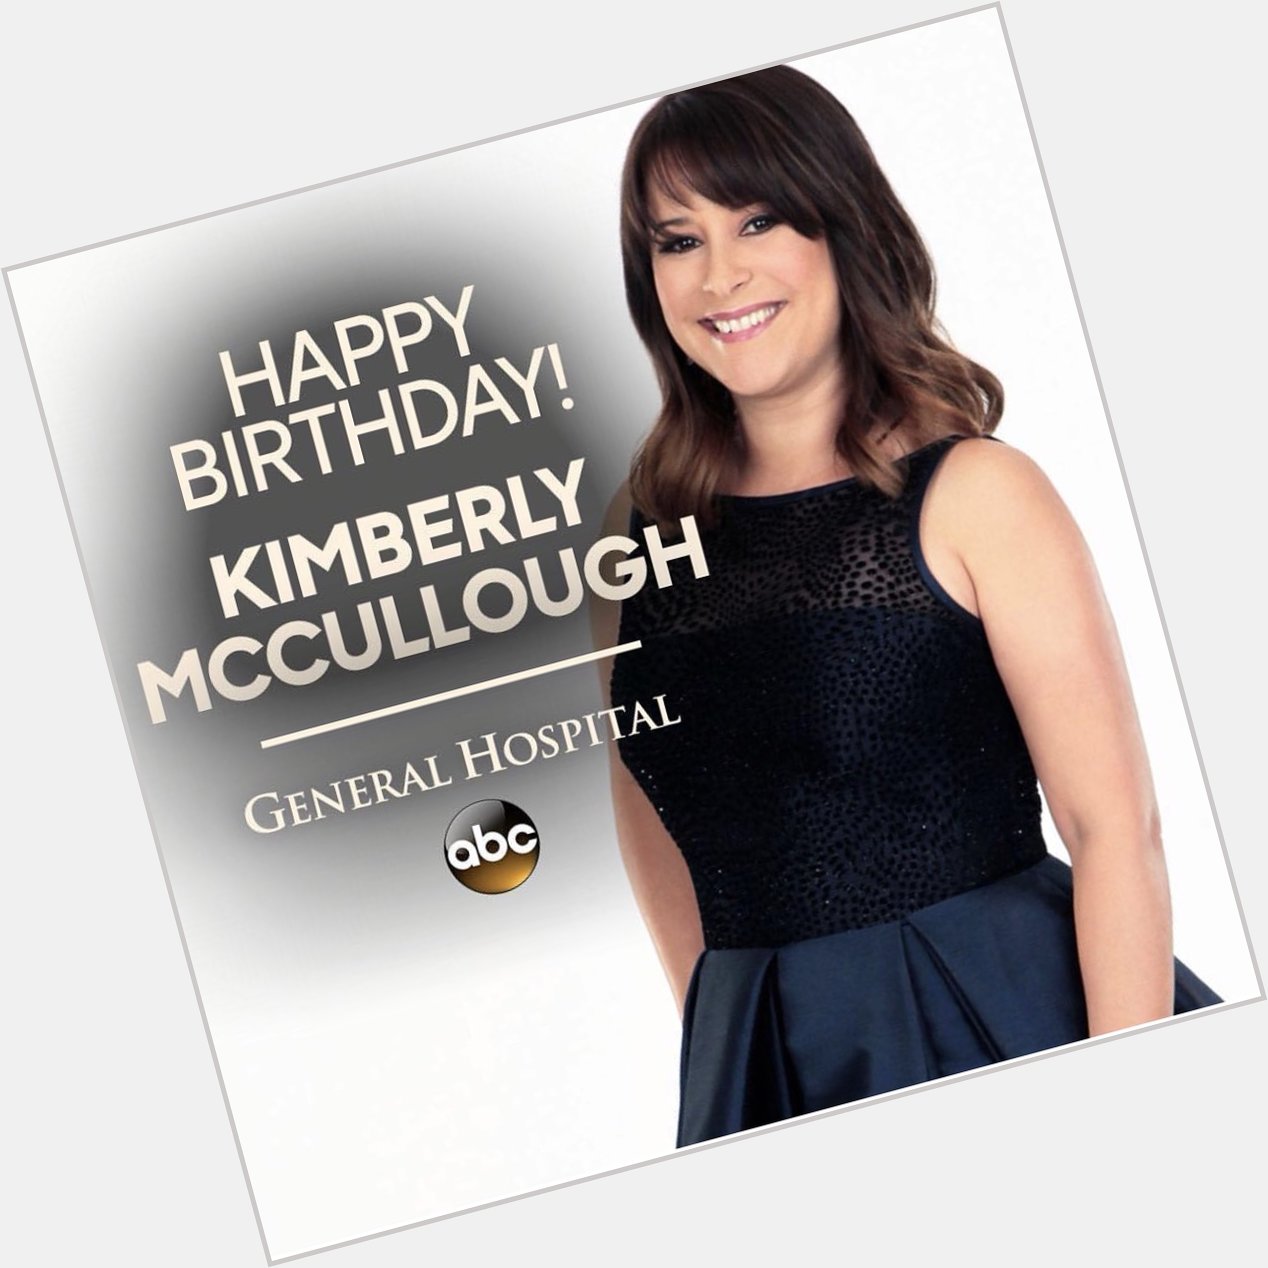  hope you have a great day! Happy Birthday Kimberly McCullough    